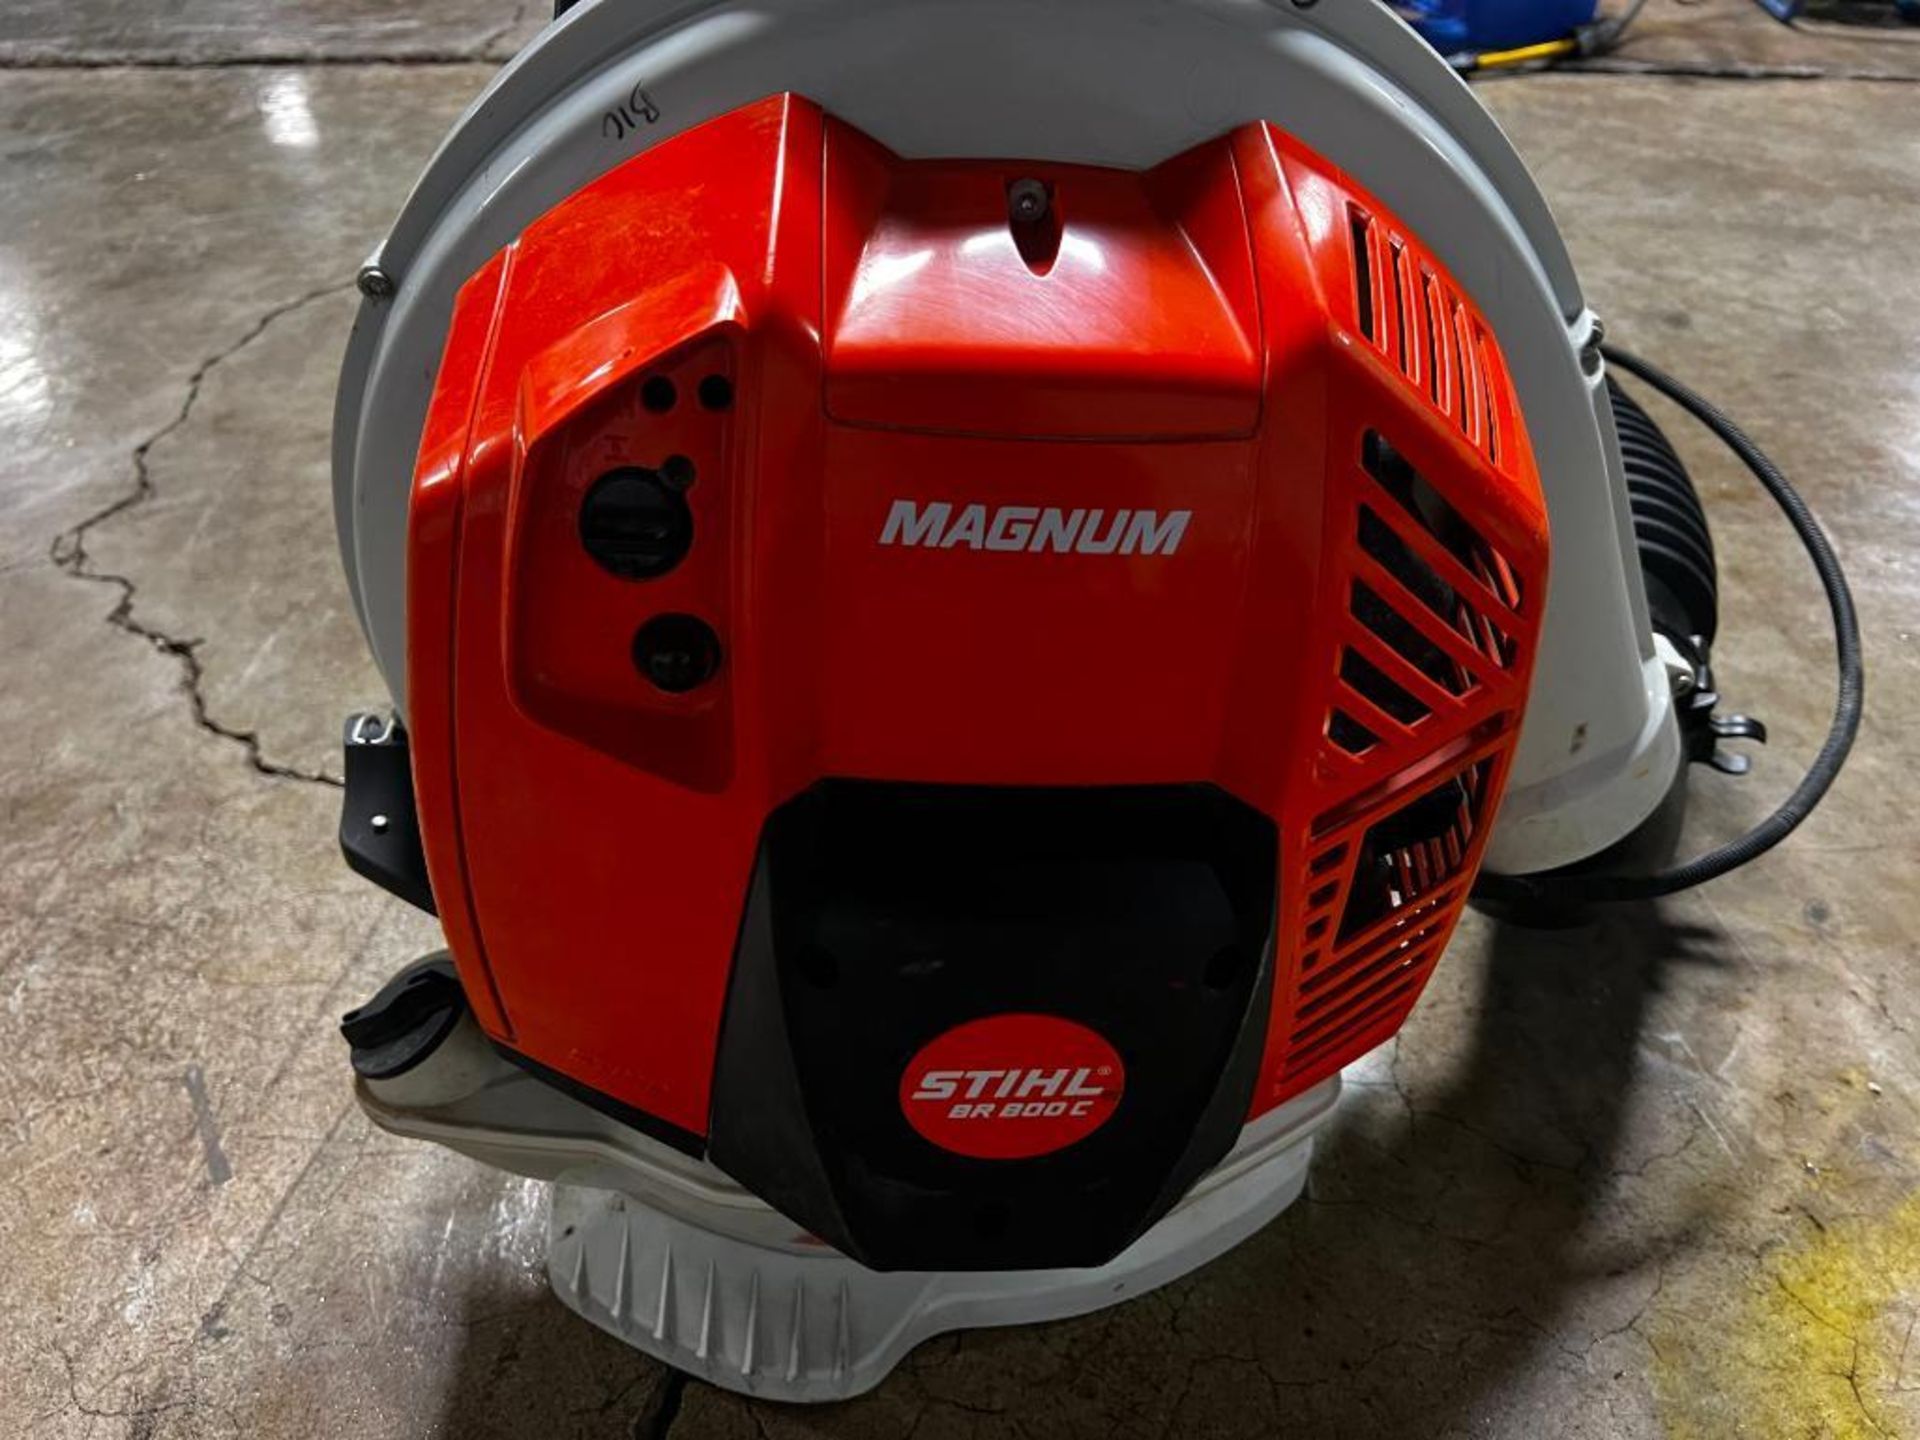 Stihl Magnum BR 800 C Backpack Leaf Blower. Located in Mt. Pleasant, IA - Image 2 of 4